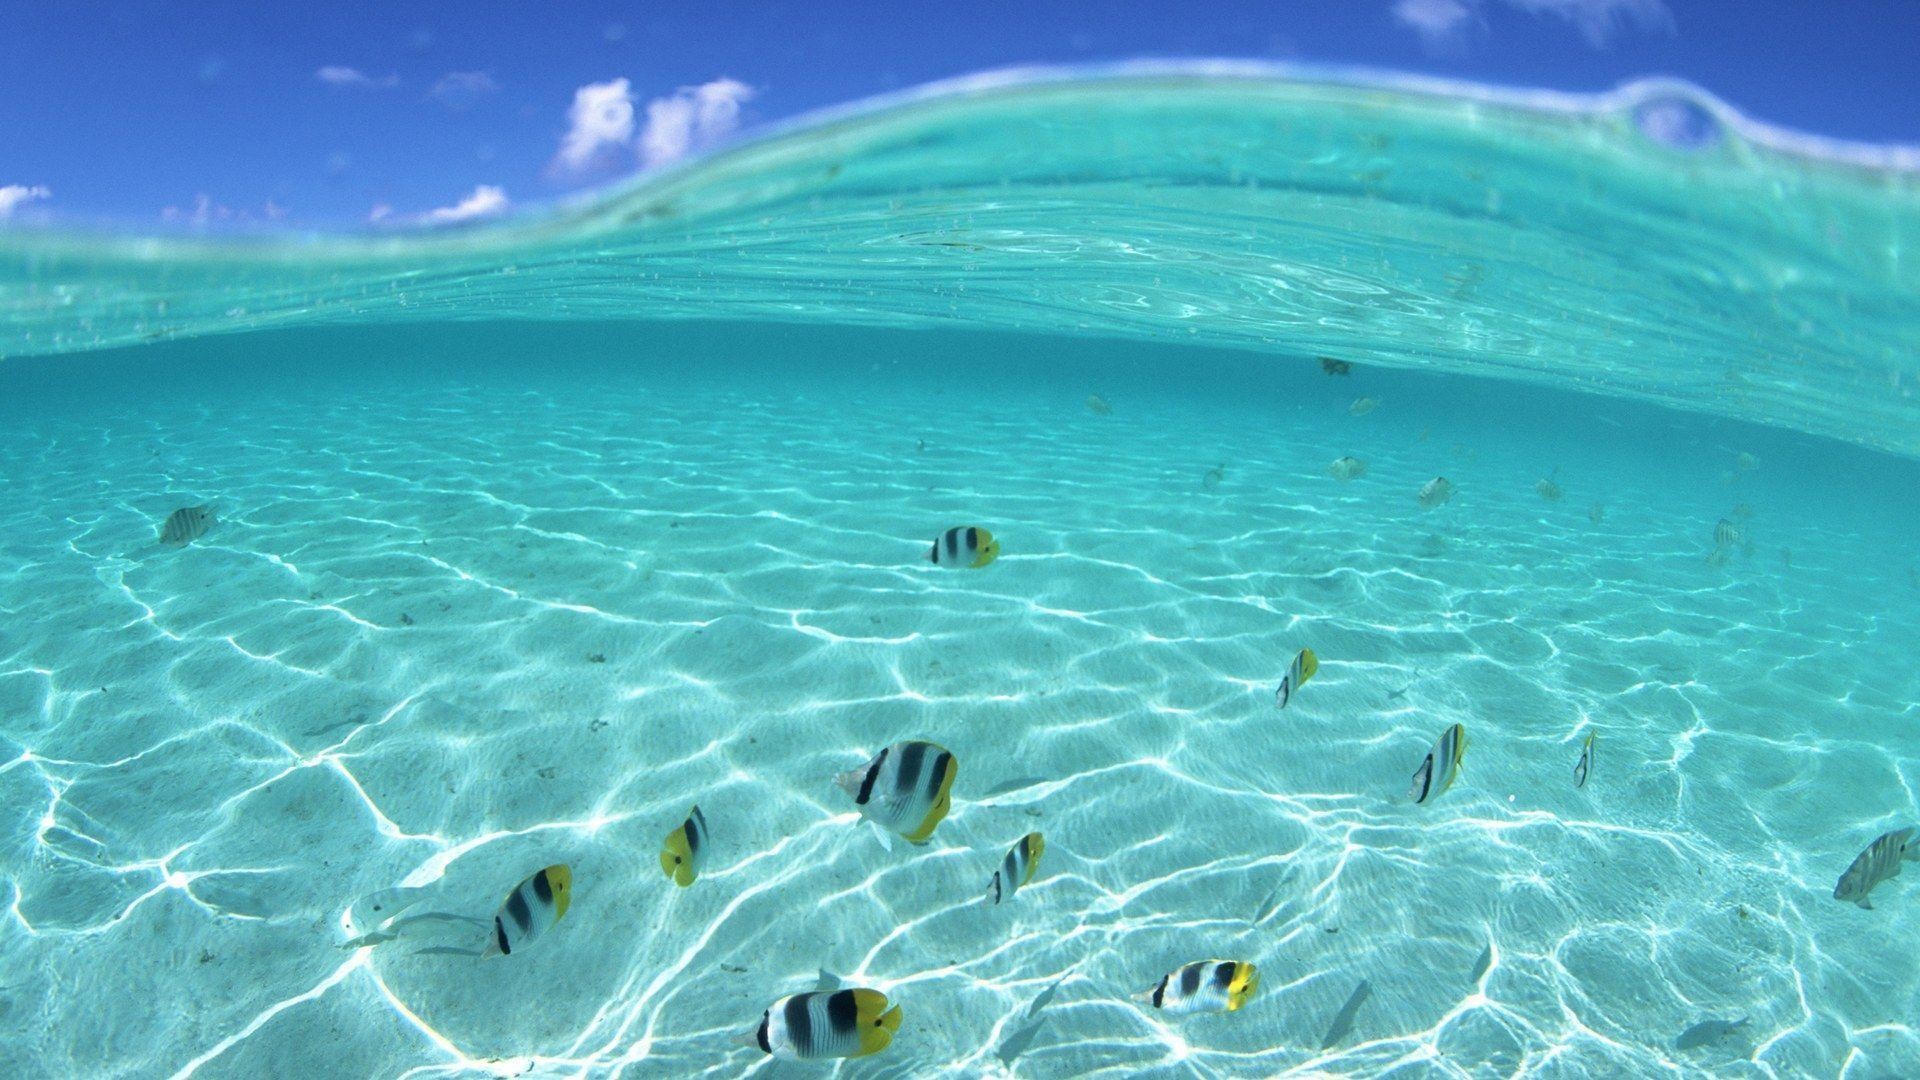 1920x1080 Hawaii Underwater Life Wallpaper Wide or HD | Beaches Wallpapers